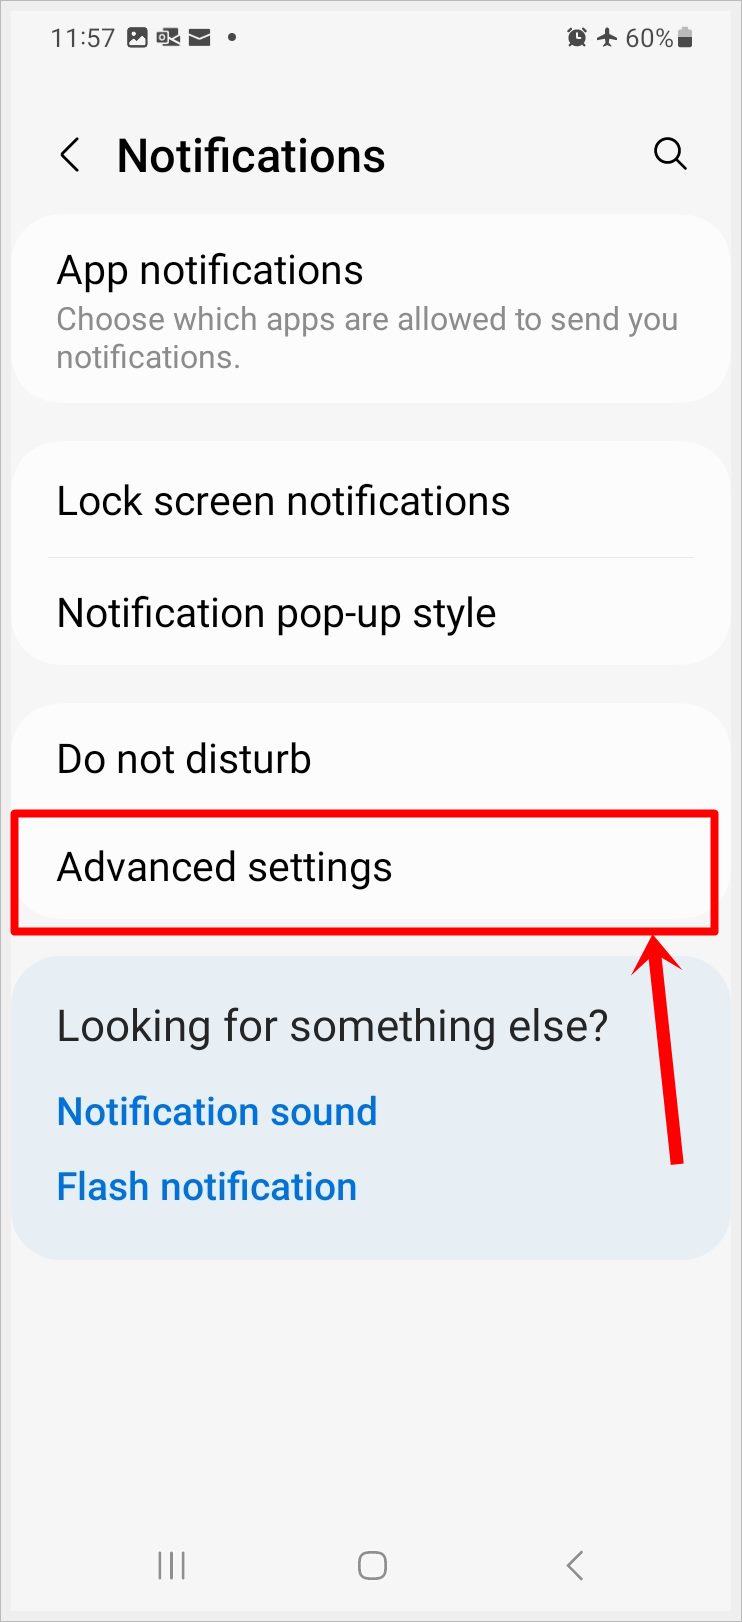 This image shows a screenshot of the 'Notifications' screen of an Android phone with the 'Advanced settings' option highlighted.